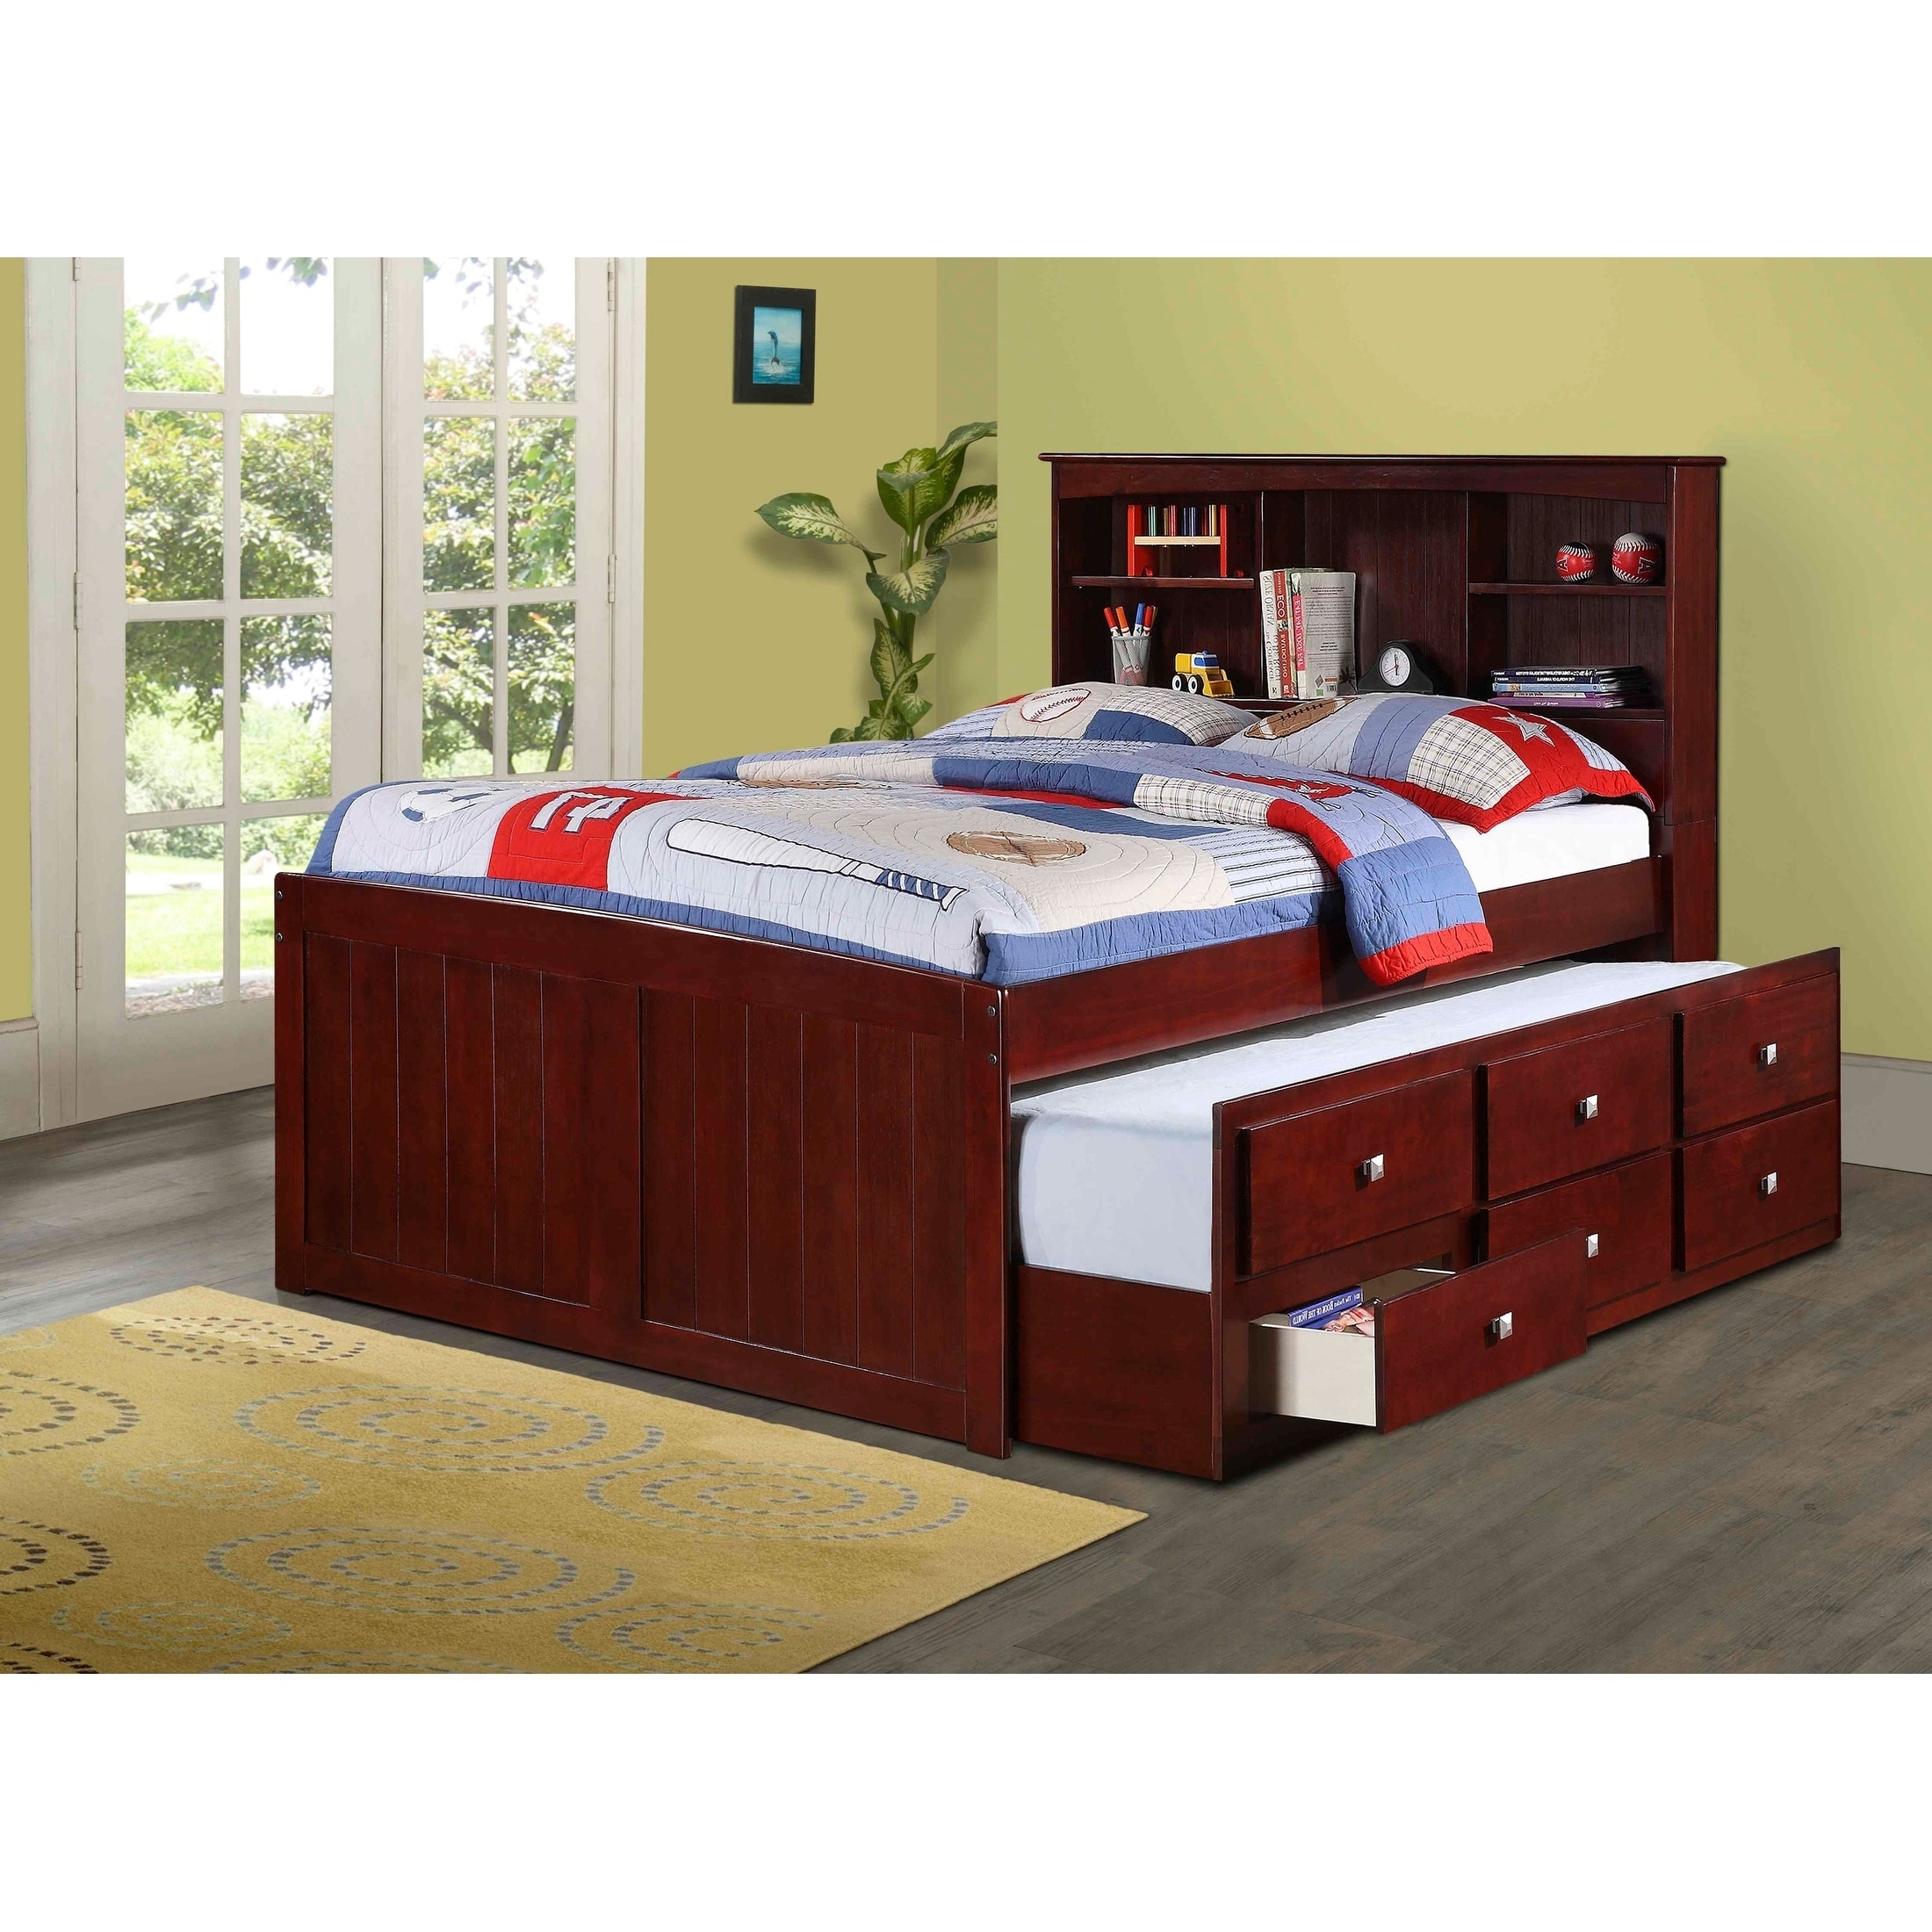 childrens trundle bed